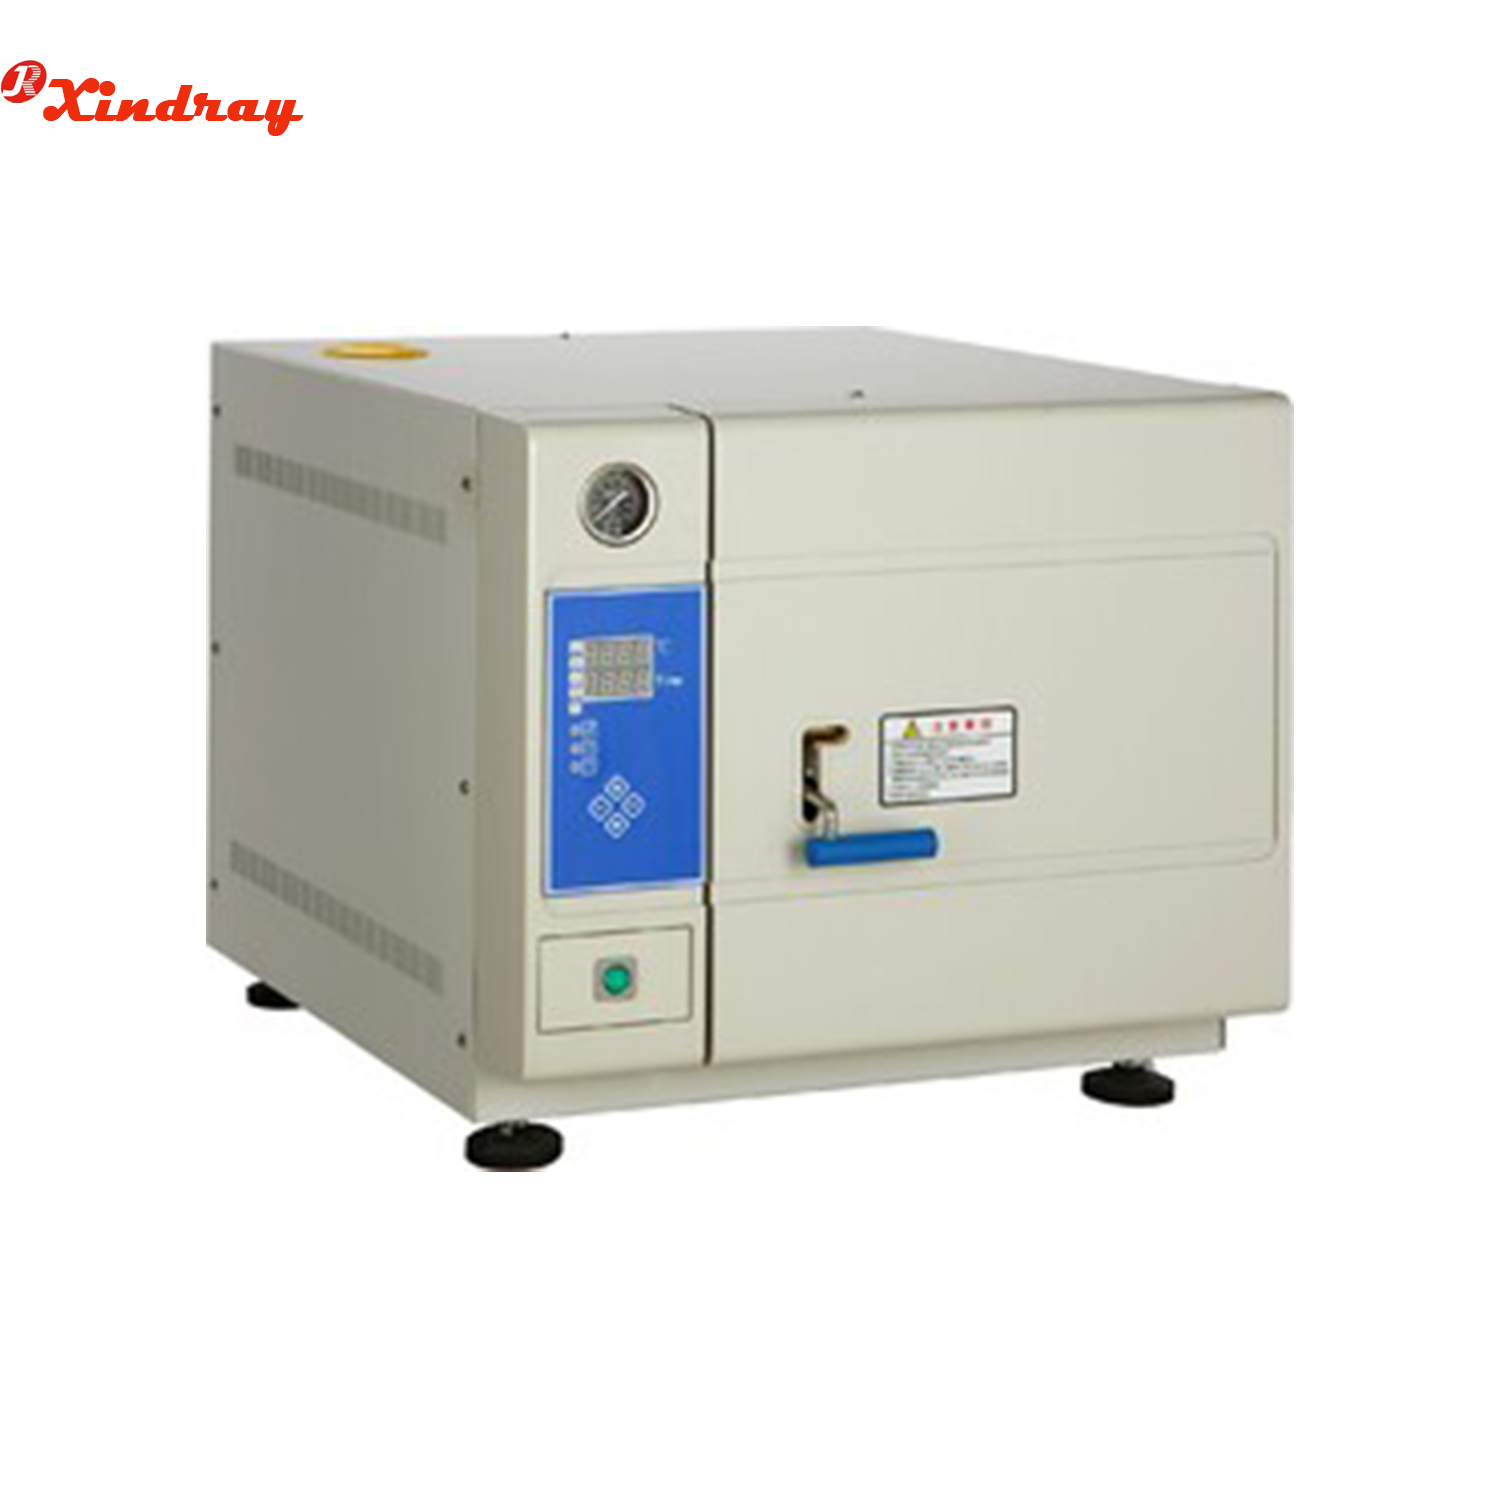 Portably Table Top Steam Sterilizers fully automatic microcomputer type 